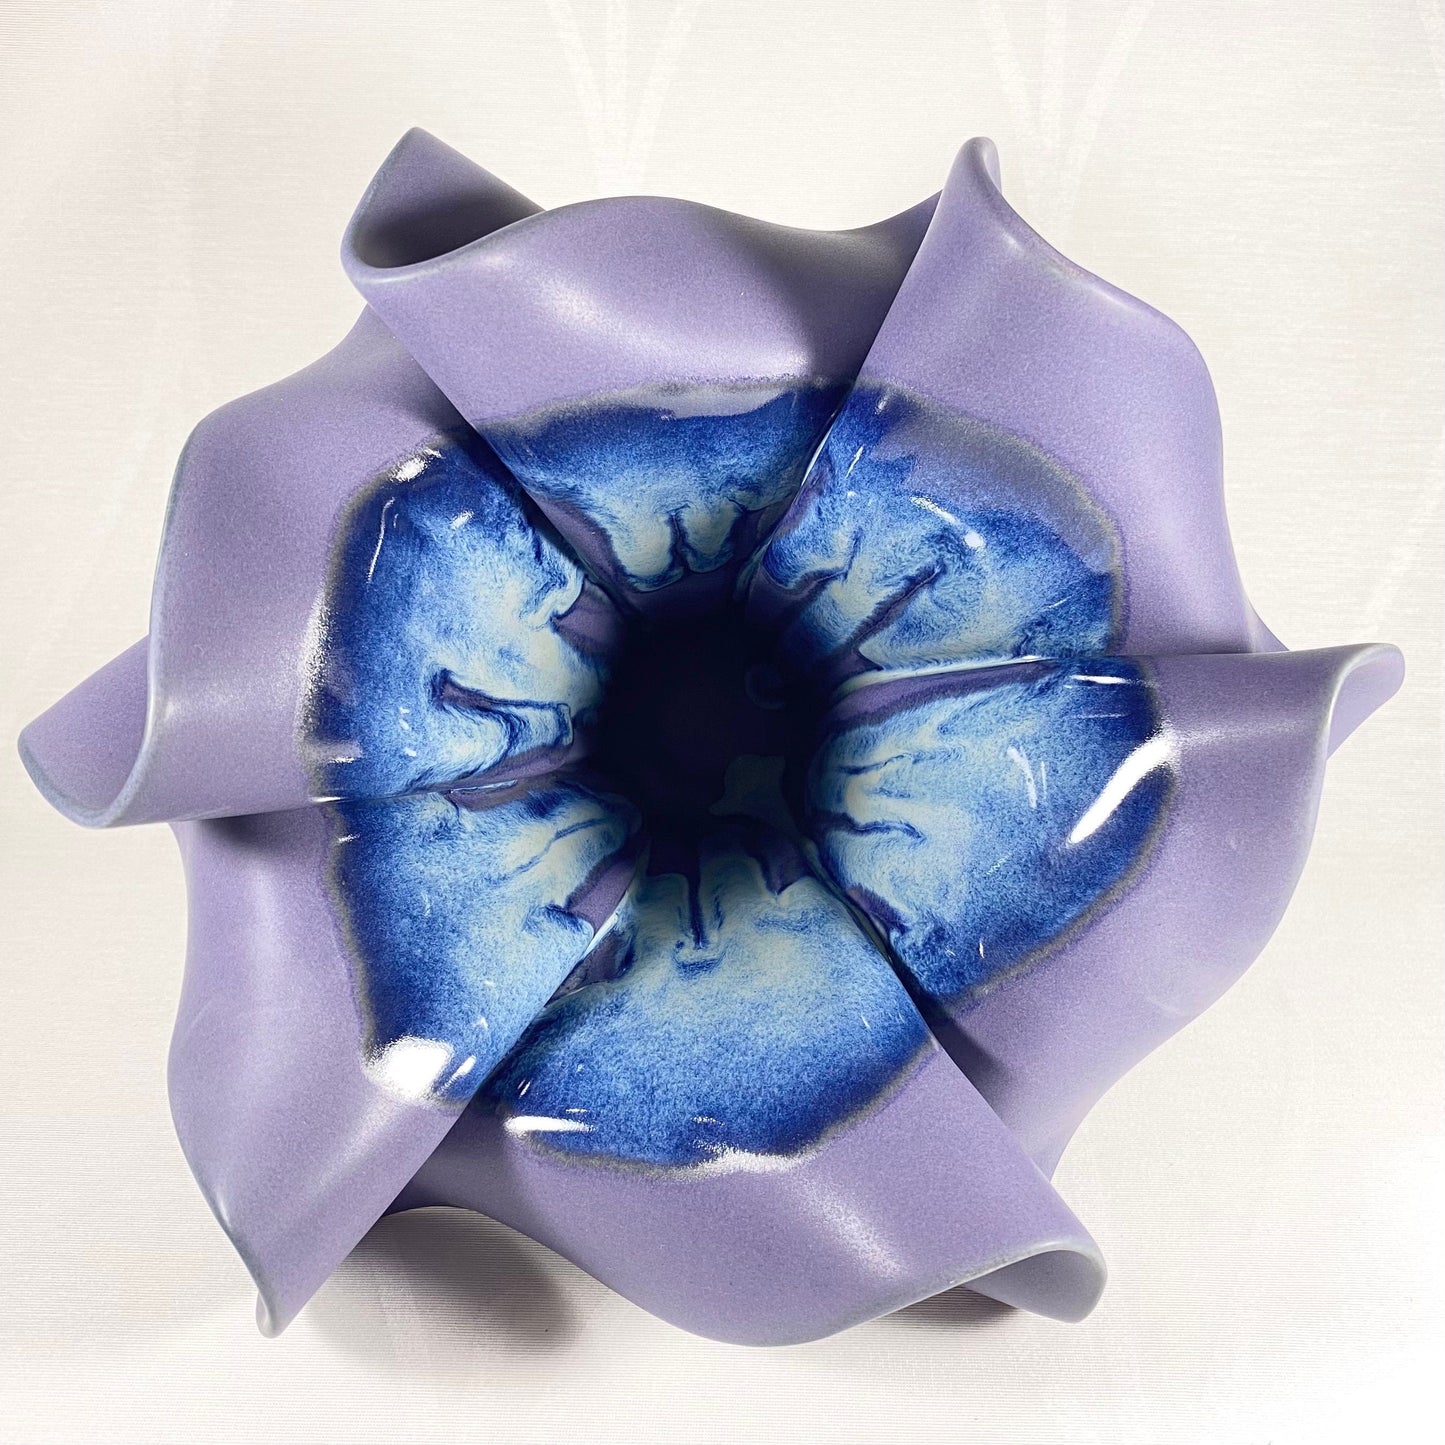 Handmade Purple and Blue Sculpted Vase, Functional and Decorative Pottery